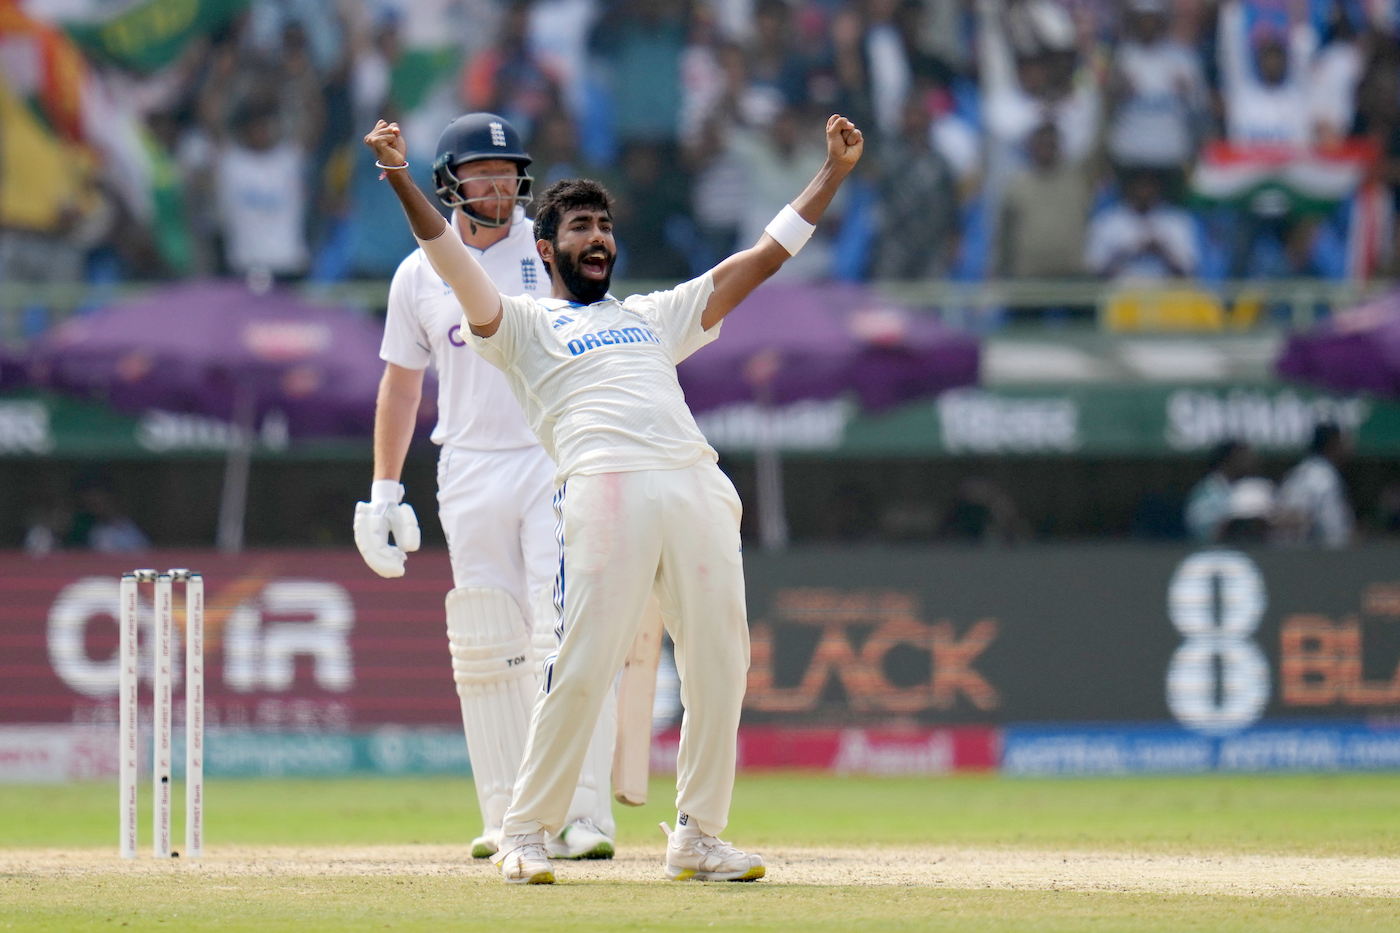 Bumrah and Ashwin beat England’s bazballers as India draw level